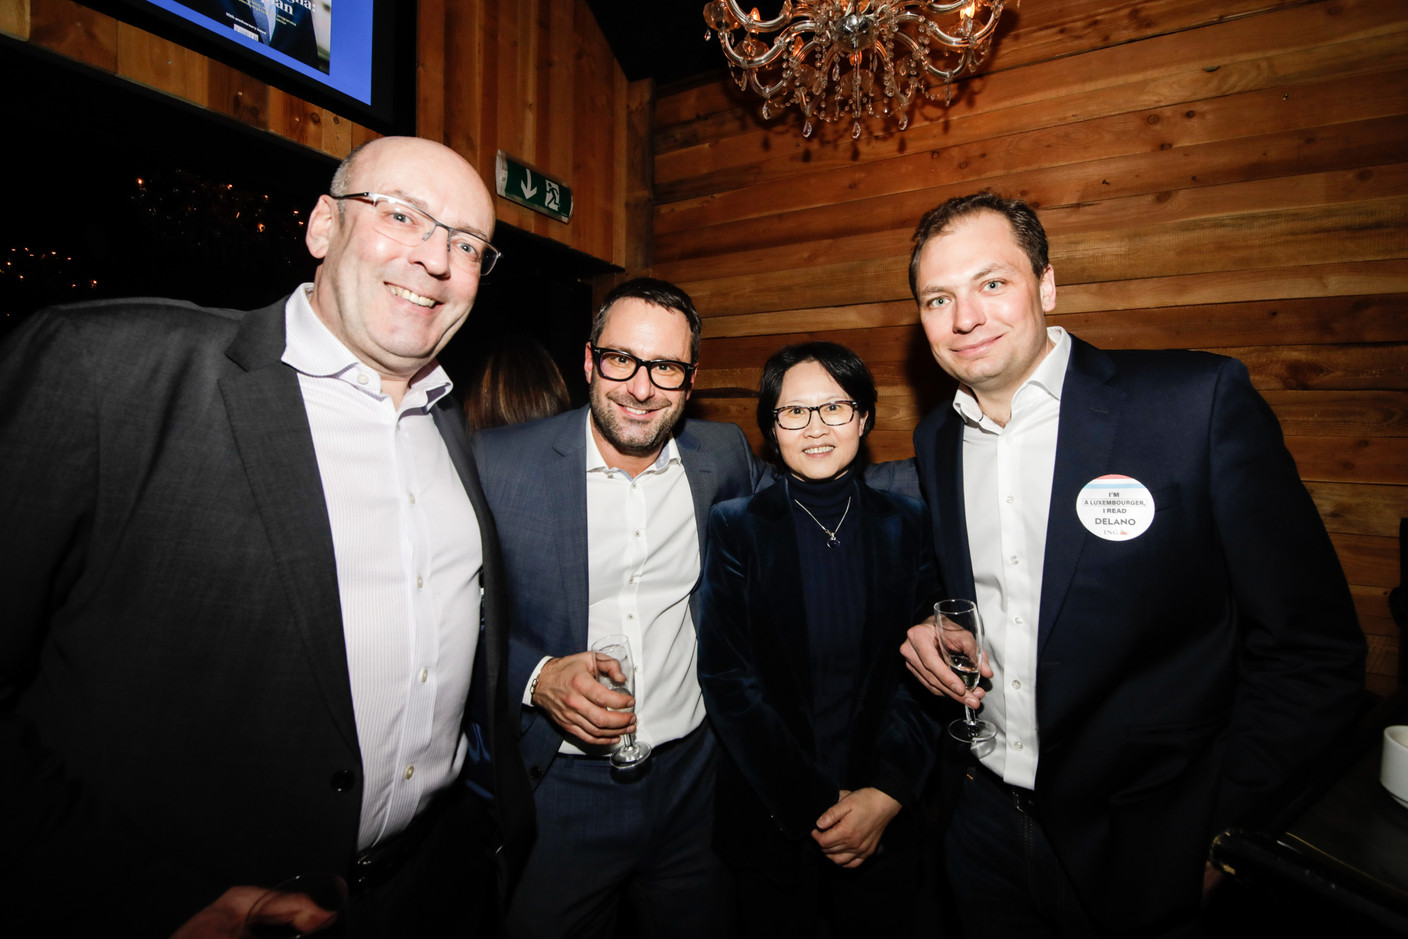 François Benoy (Green party MP and Luxembourg City council member), on right, seen at Delano’s 12th anniversary party, 23 February 2023. Photo: Marie Russillo/Maison Moderne